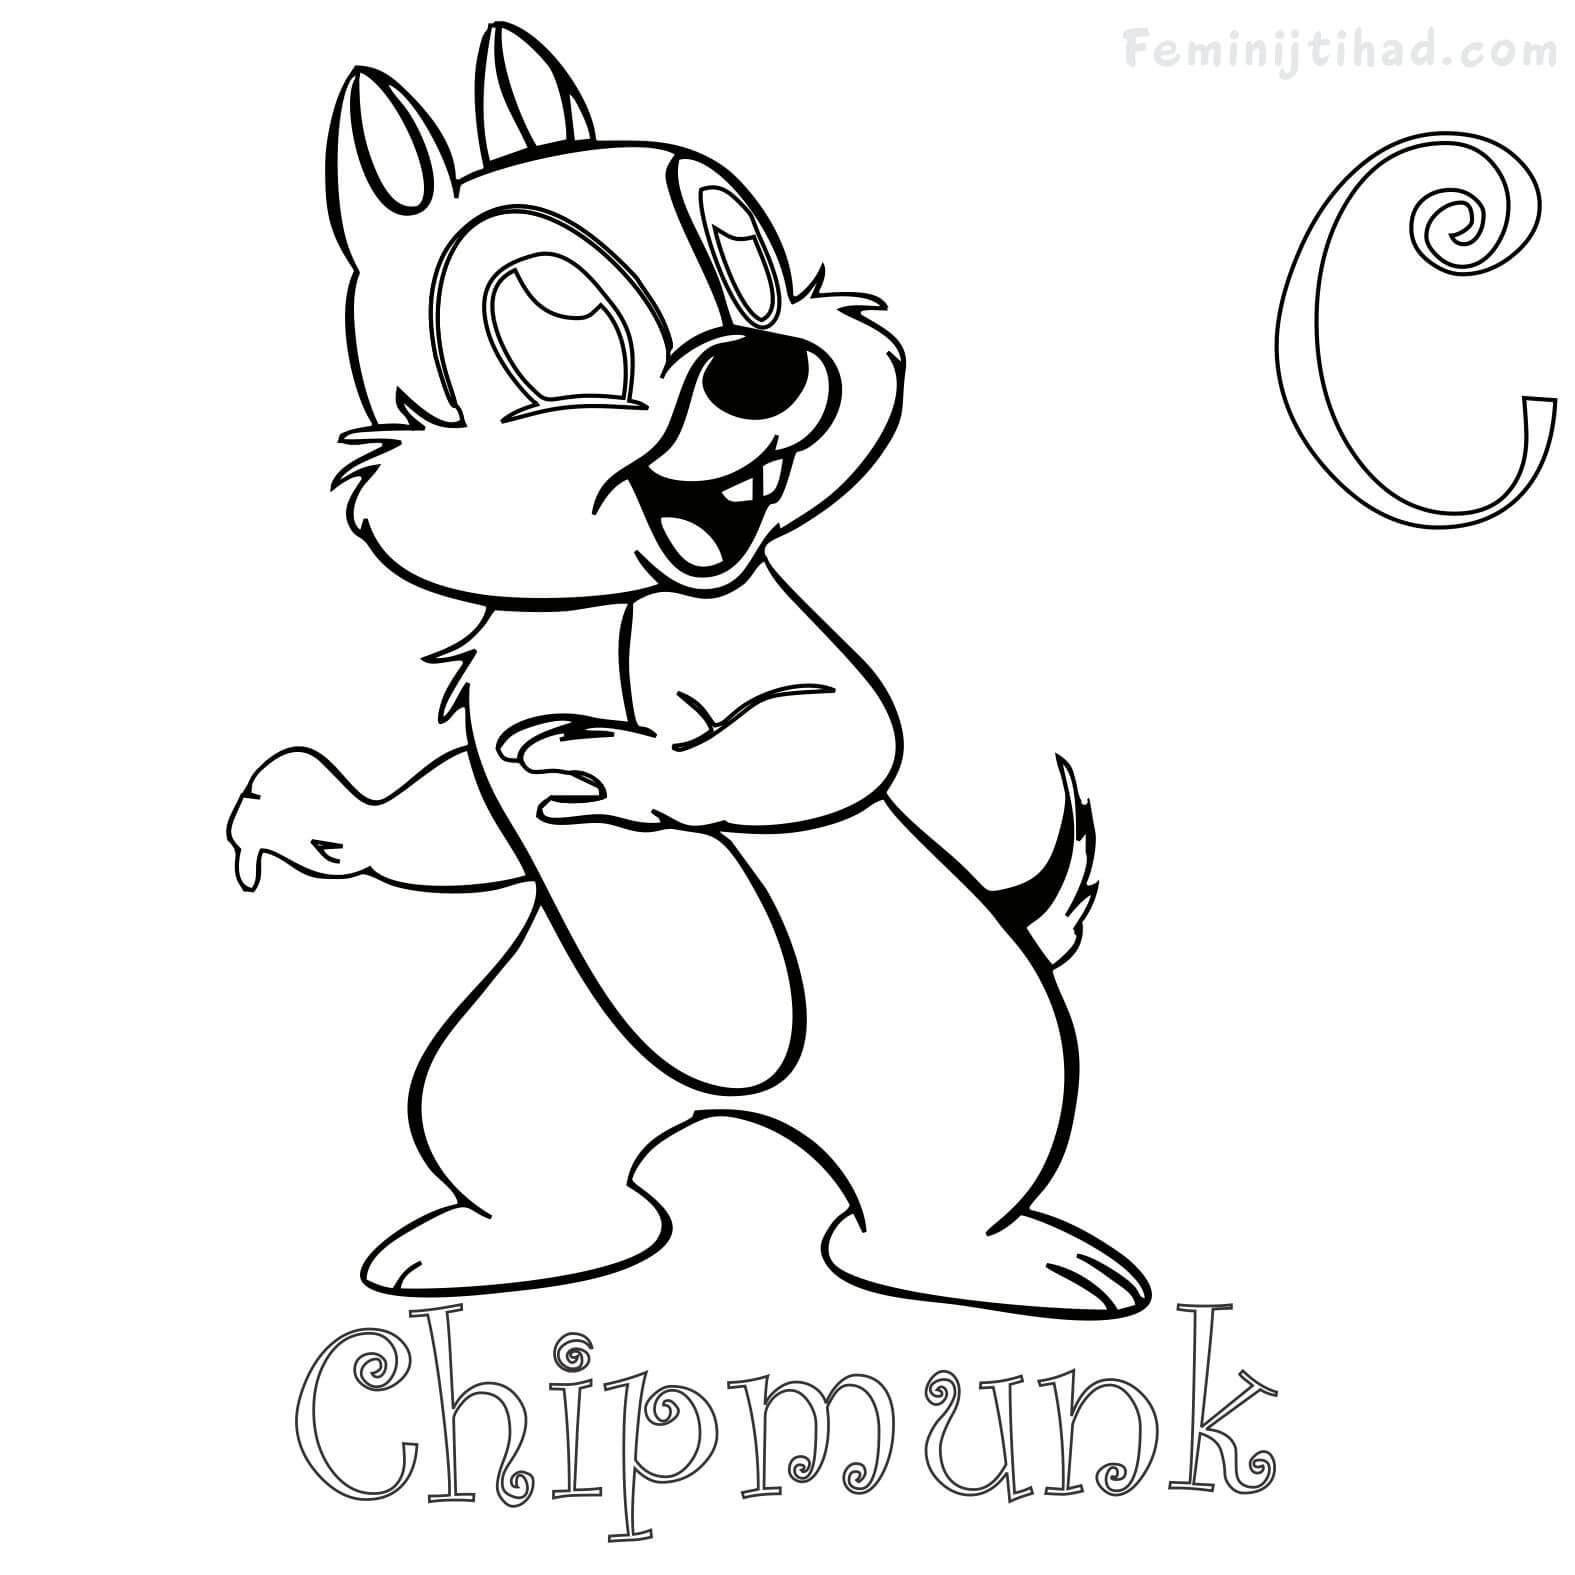 chipmunk coloring pages to print